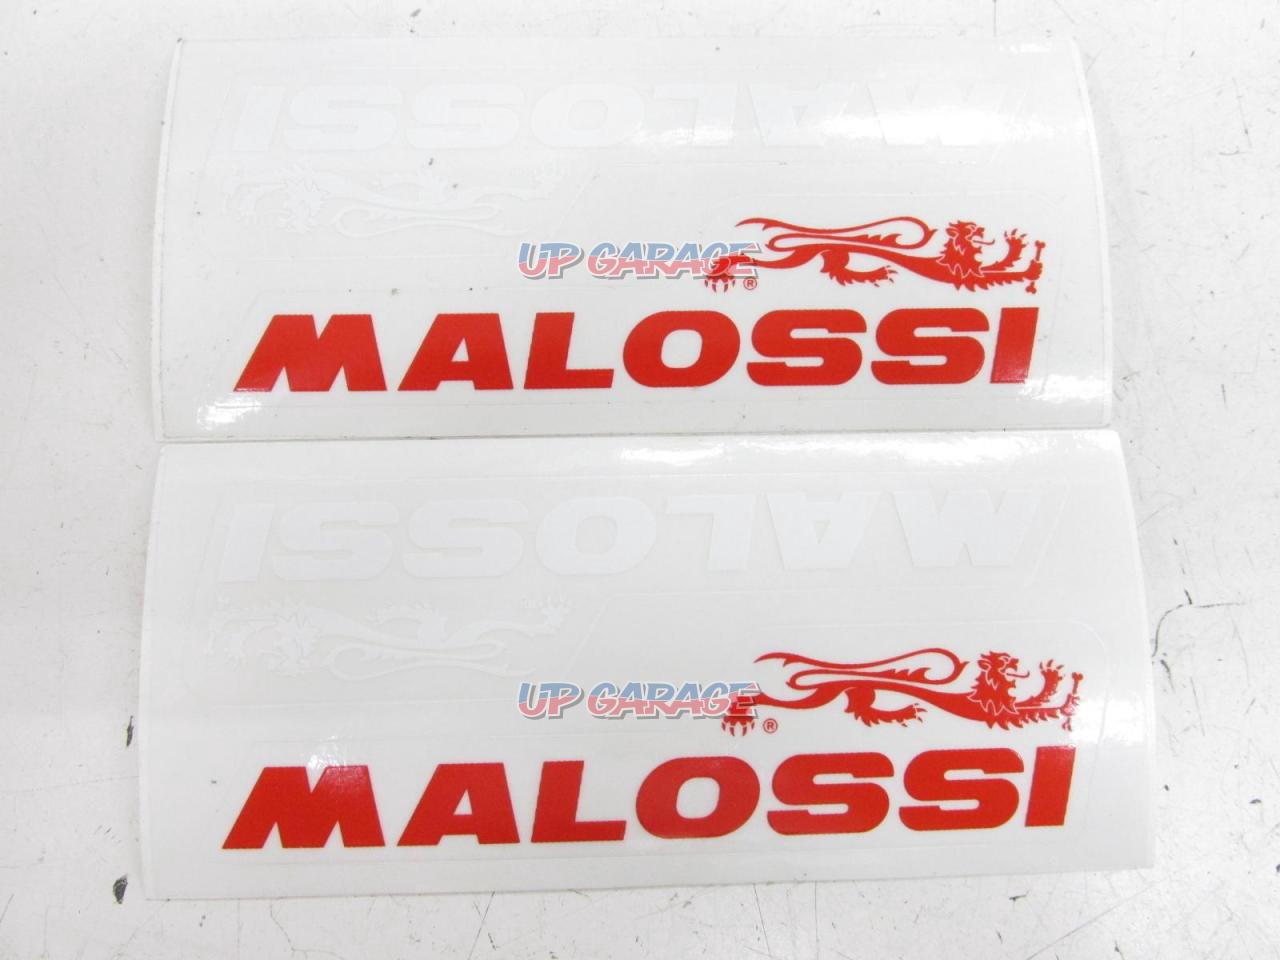 MALOSSI Marosshi Sticker Small 1 Each For White/red X 2 Mount Size 44×95mm, Other Accessories